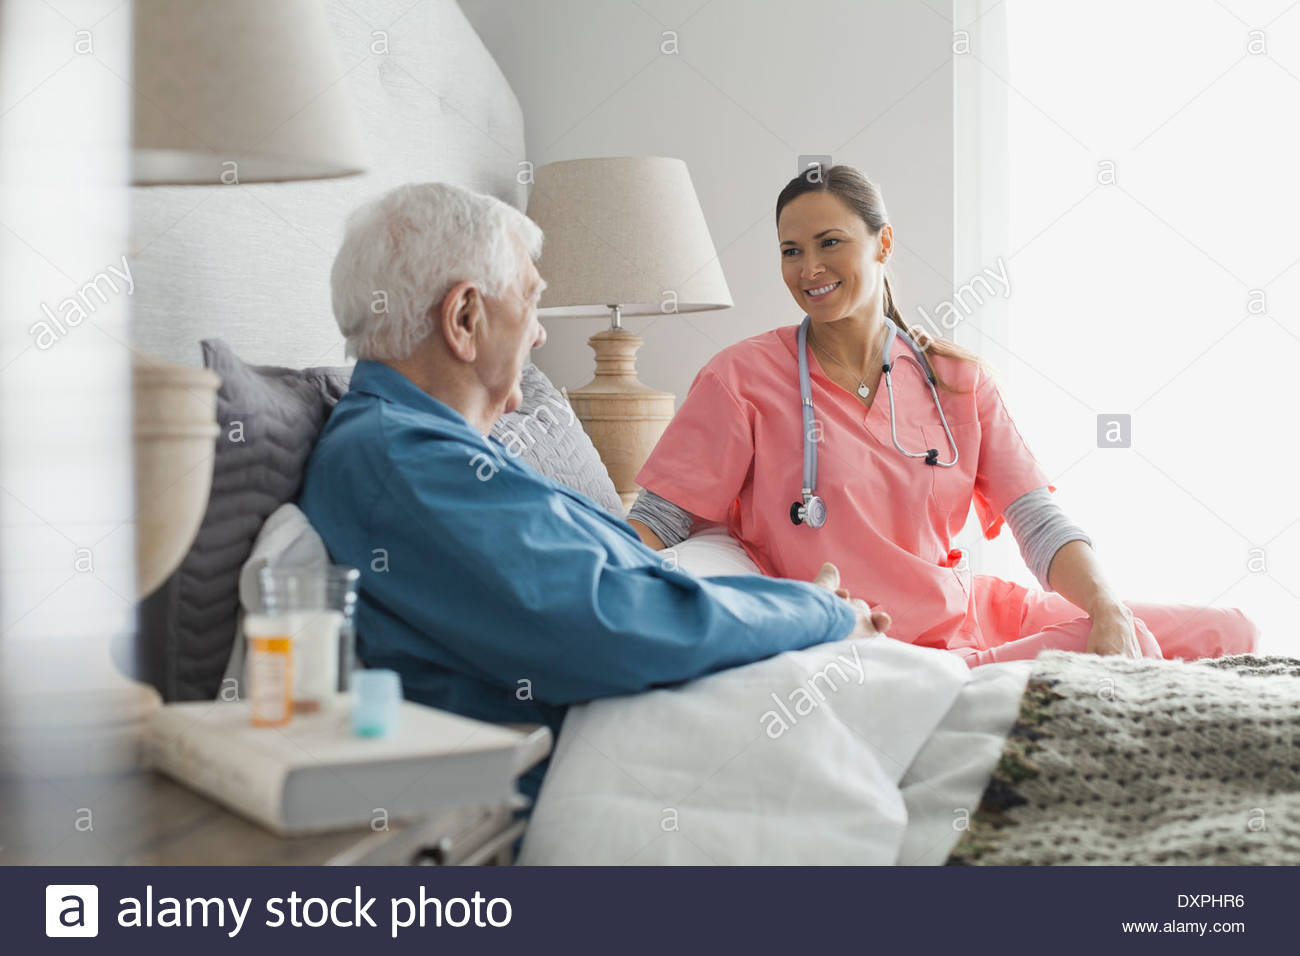 Home care nurse sitting with senior patient Stock Photo